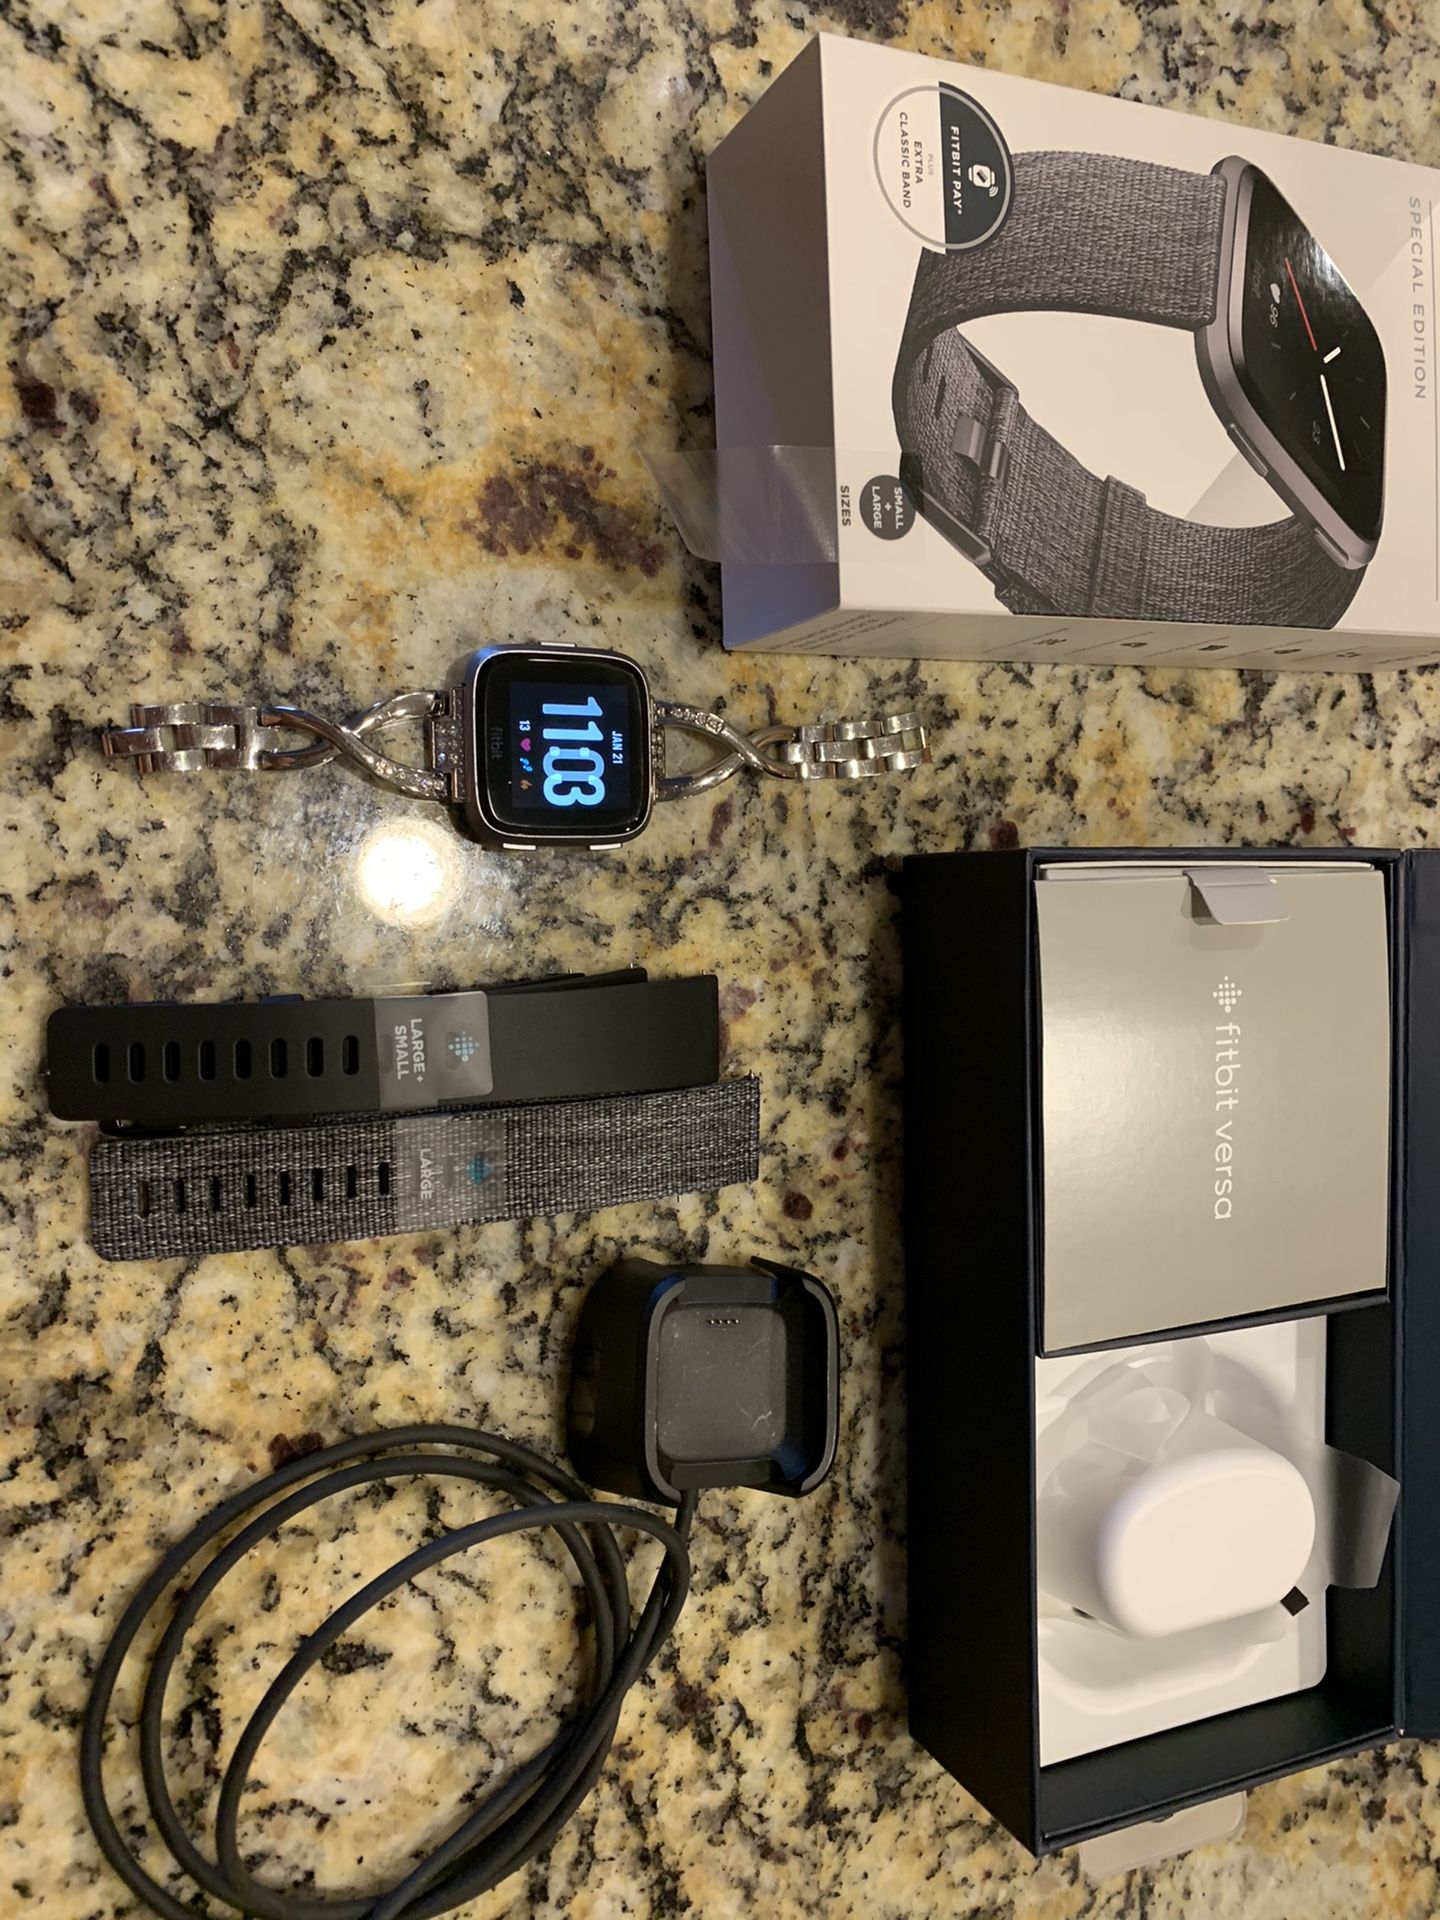 Fitbit Versa with 3 bands / Excellencent Condition/ black band and grey bands have Small and Large